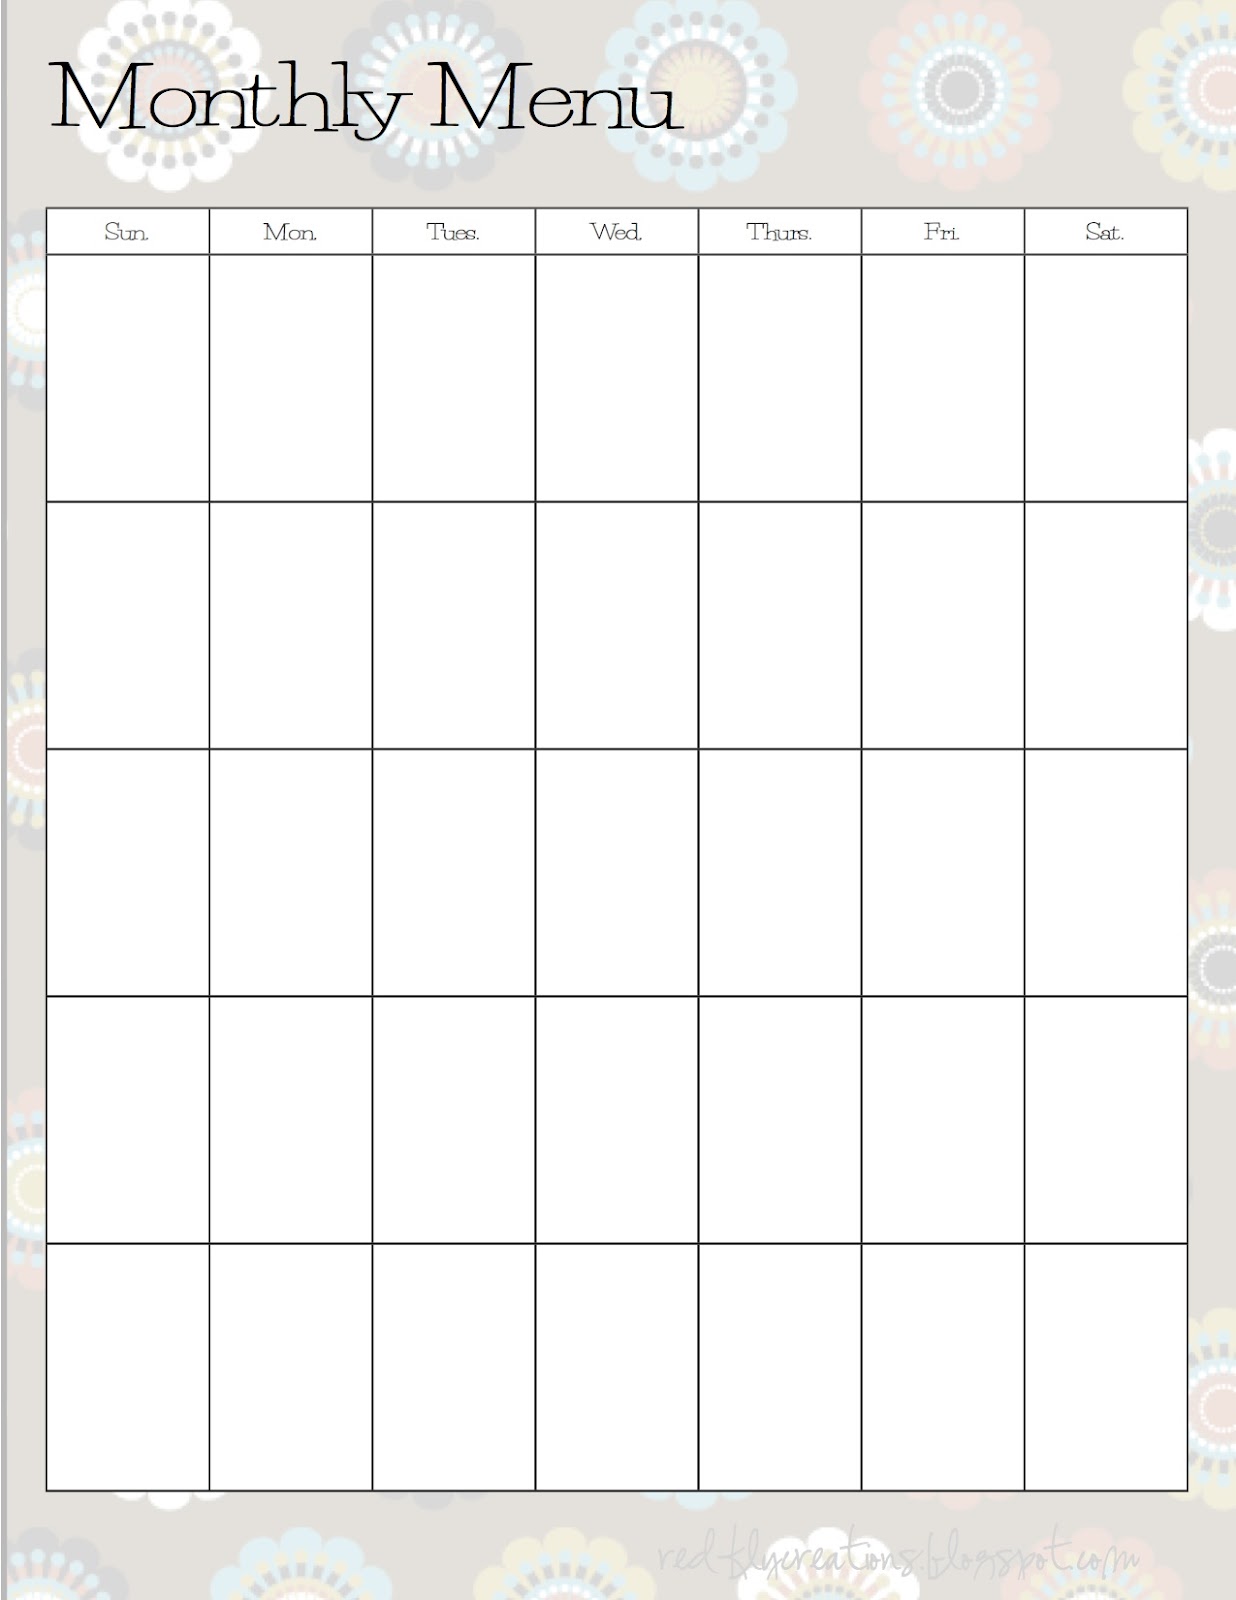 Redfly Creations: Household Notebook - Free Printables!